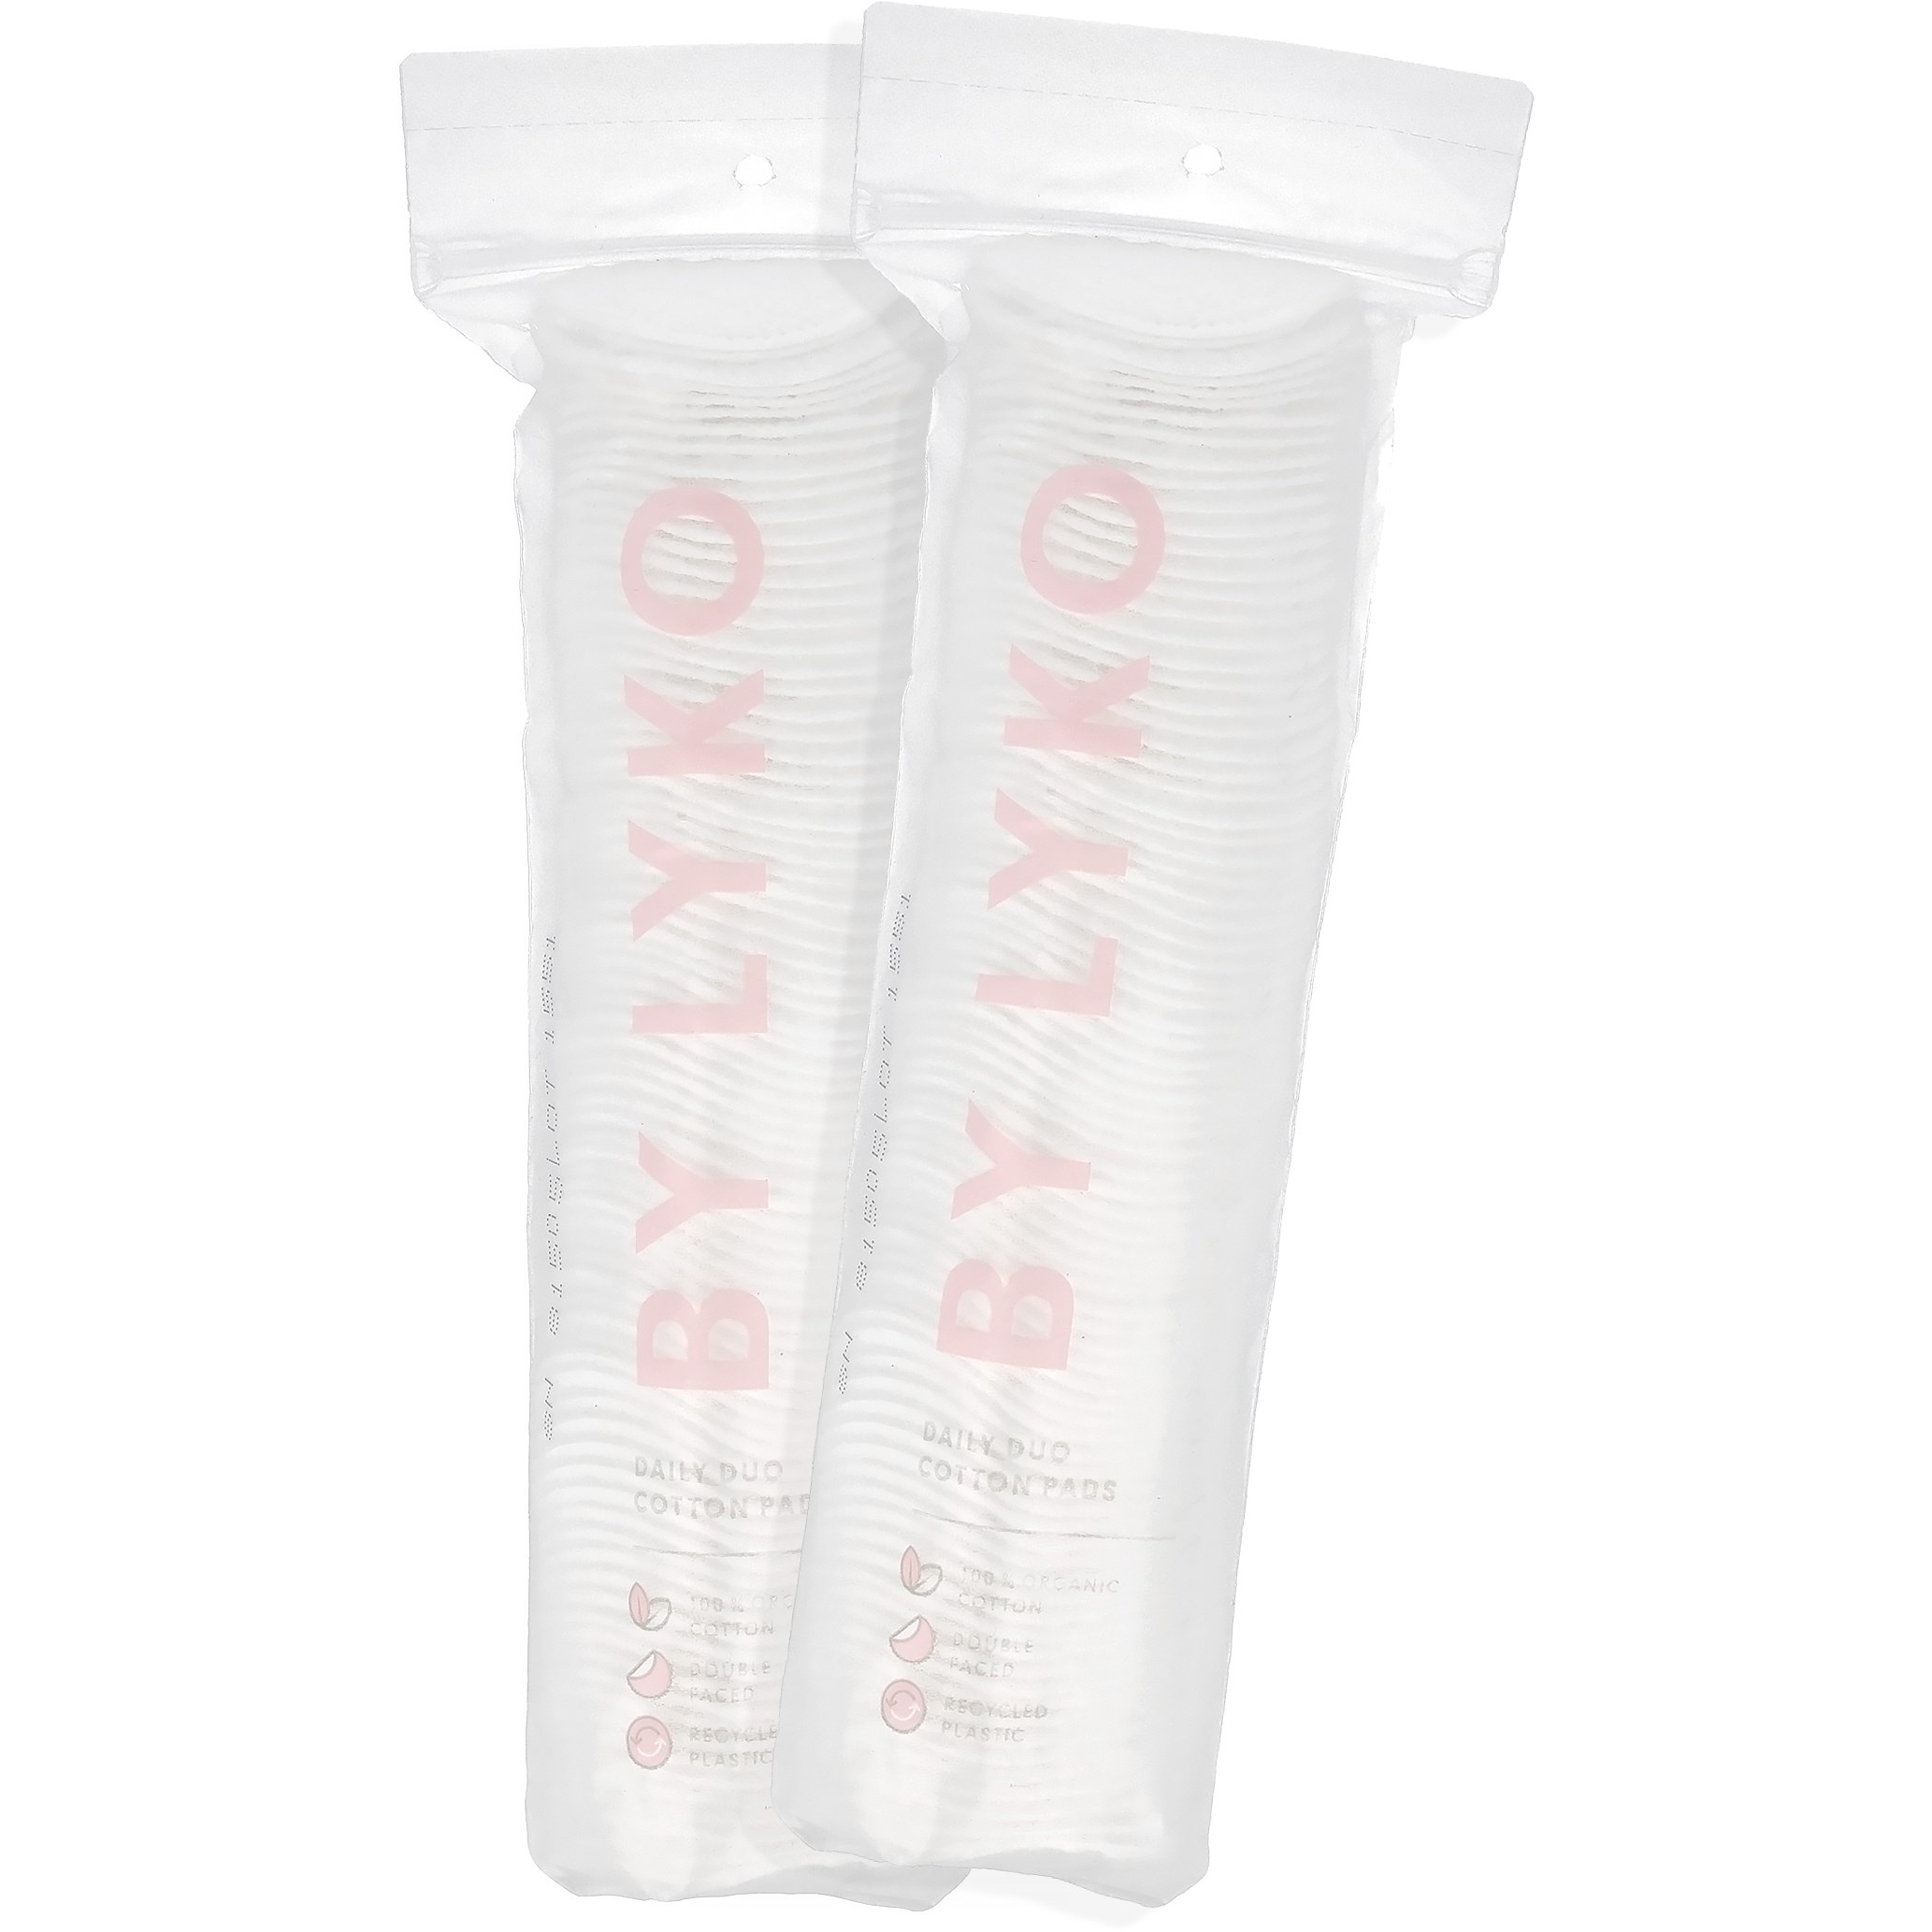 Läs mer om By Lyko Daily Duo Cotton Pads Duo